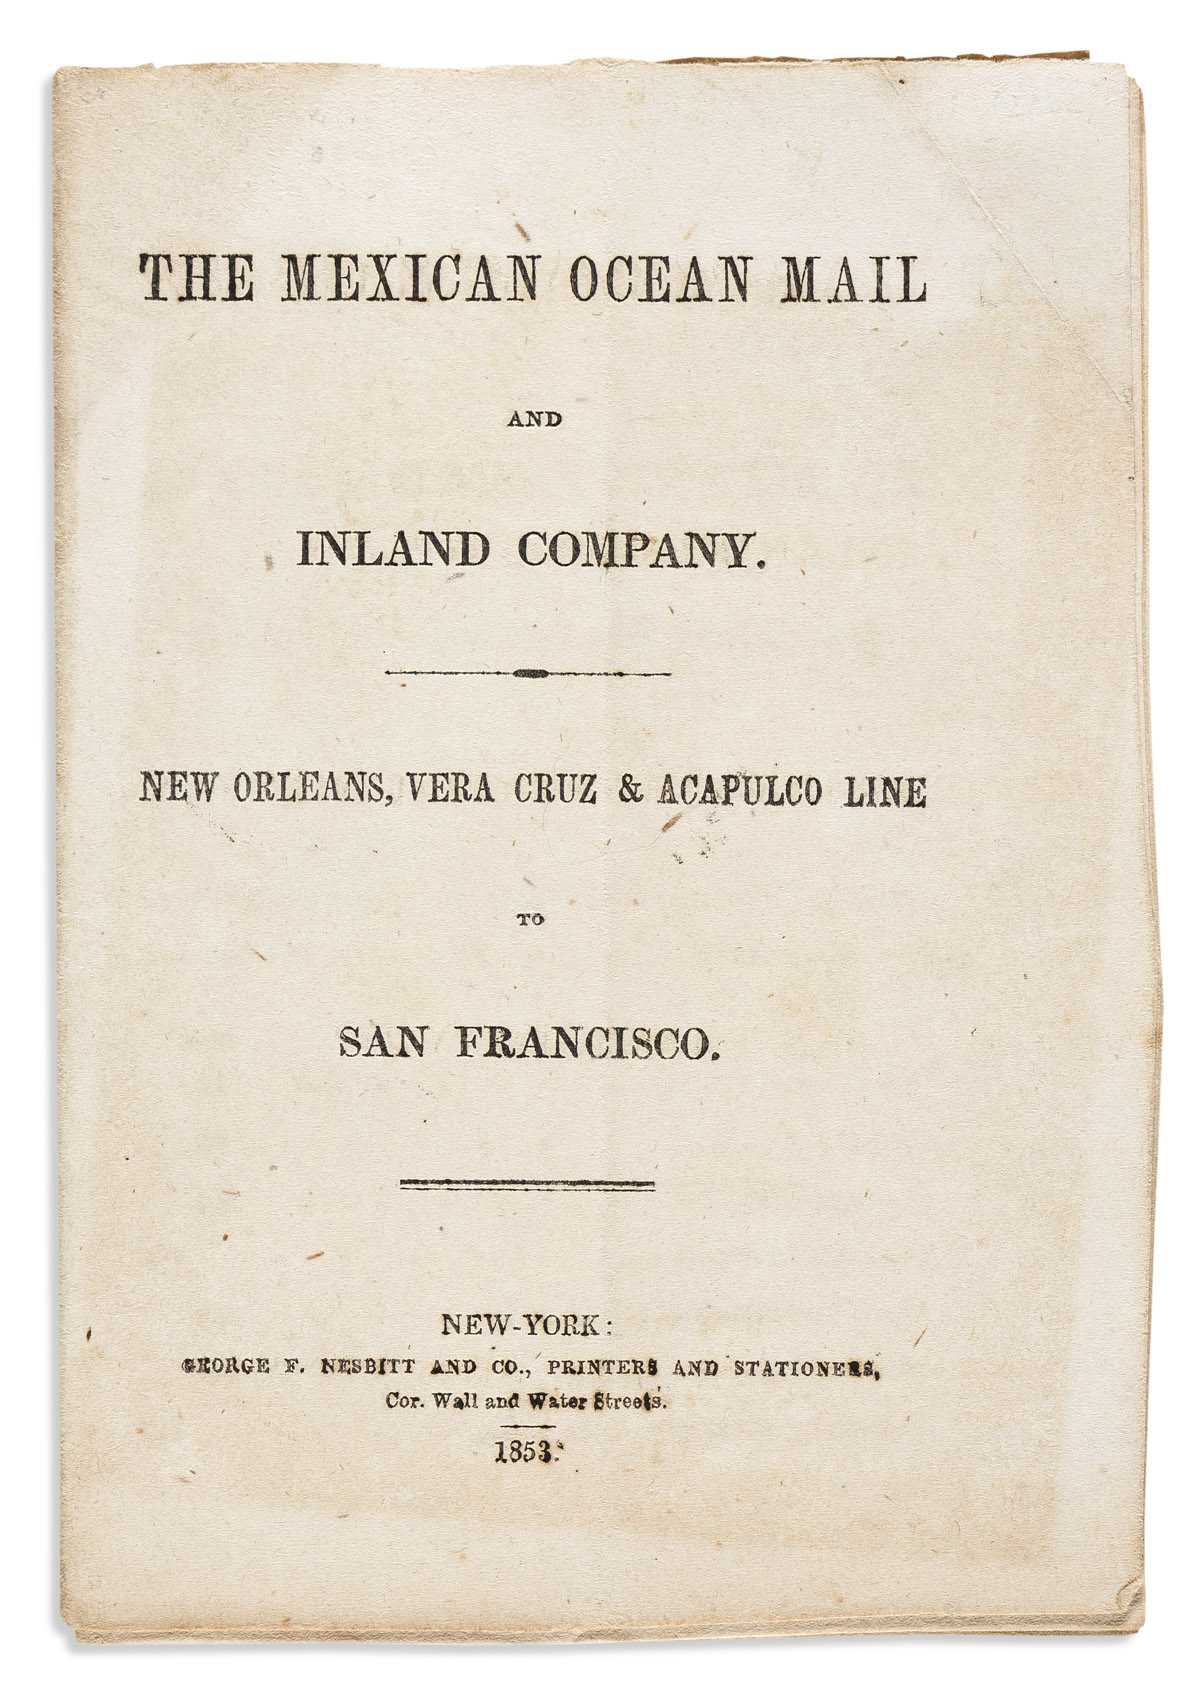 (CALIFORNIA.) The Mexican Ocean Mail and Inland Company: New Orleans, Vera Cruz & Acapulco Line to San Francisco.